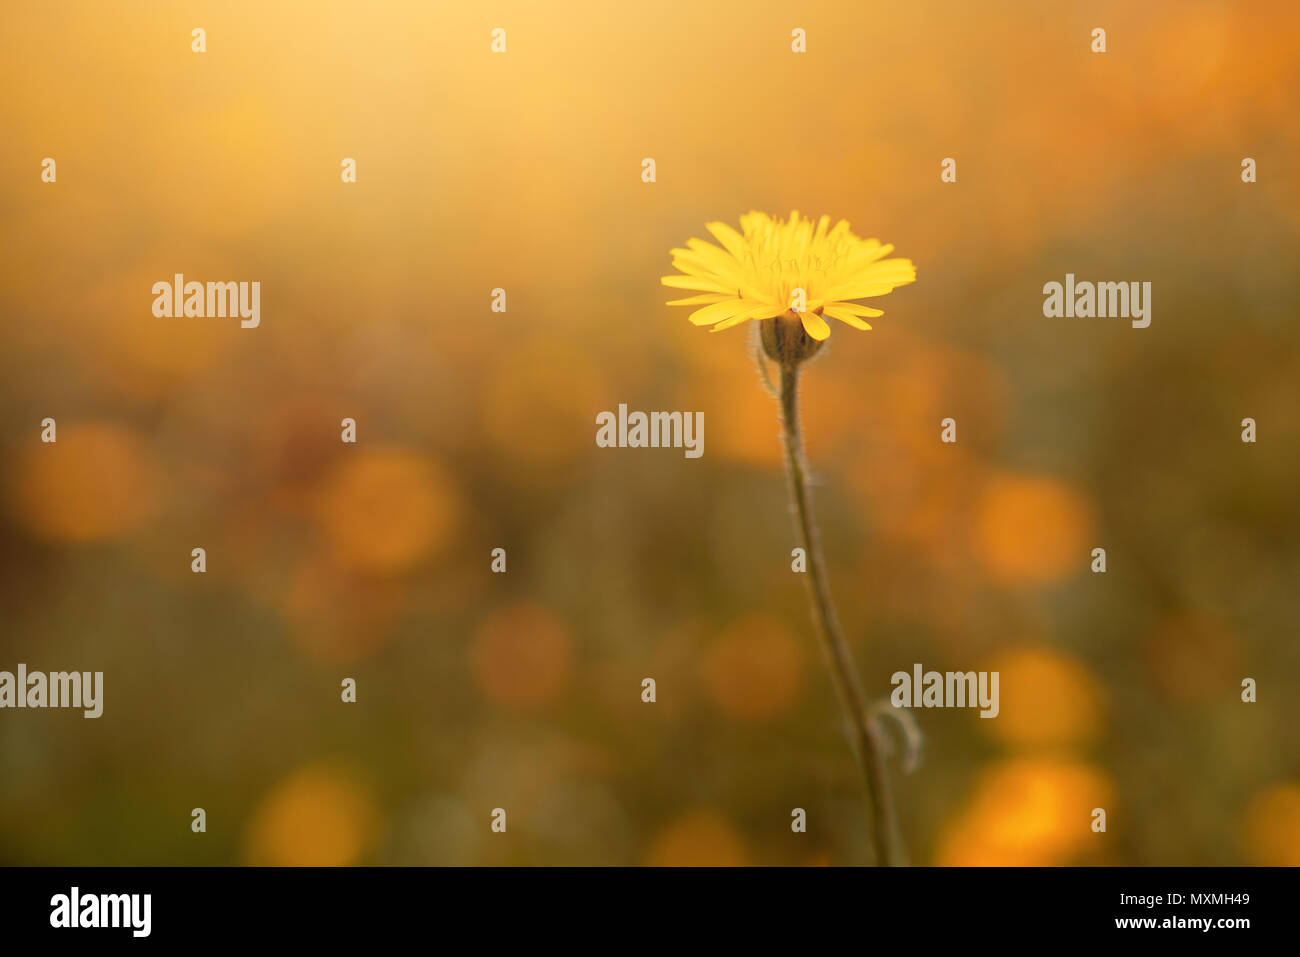 Natural yellow daisy growing in a flower garden. Stock Photo